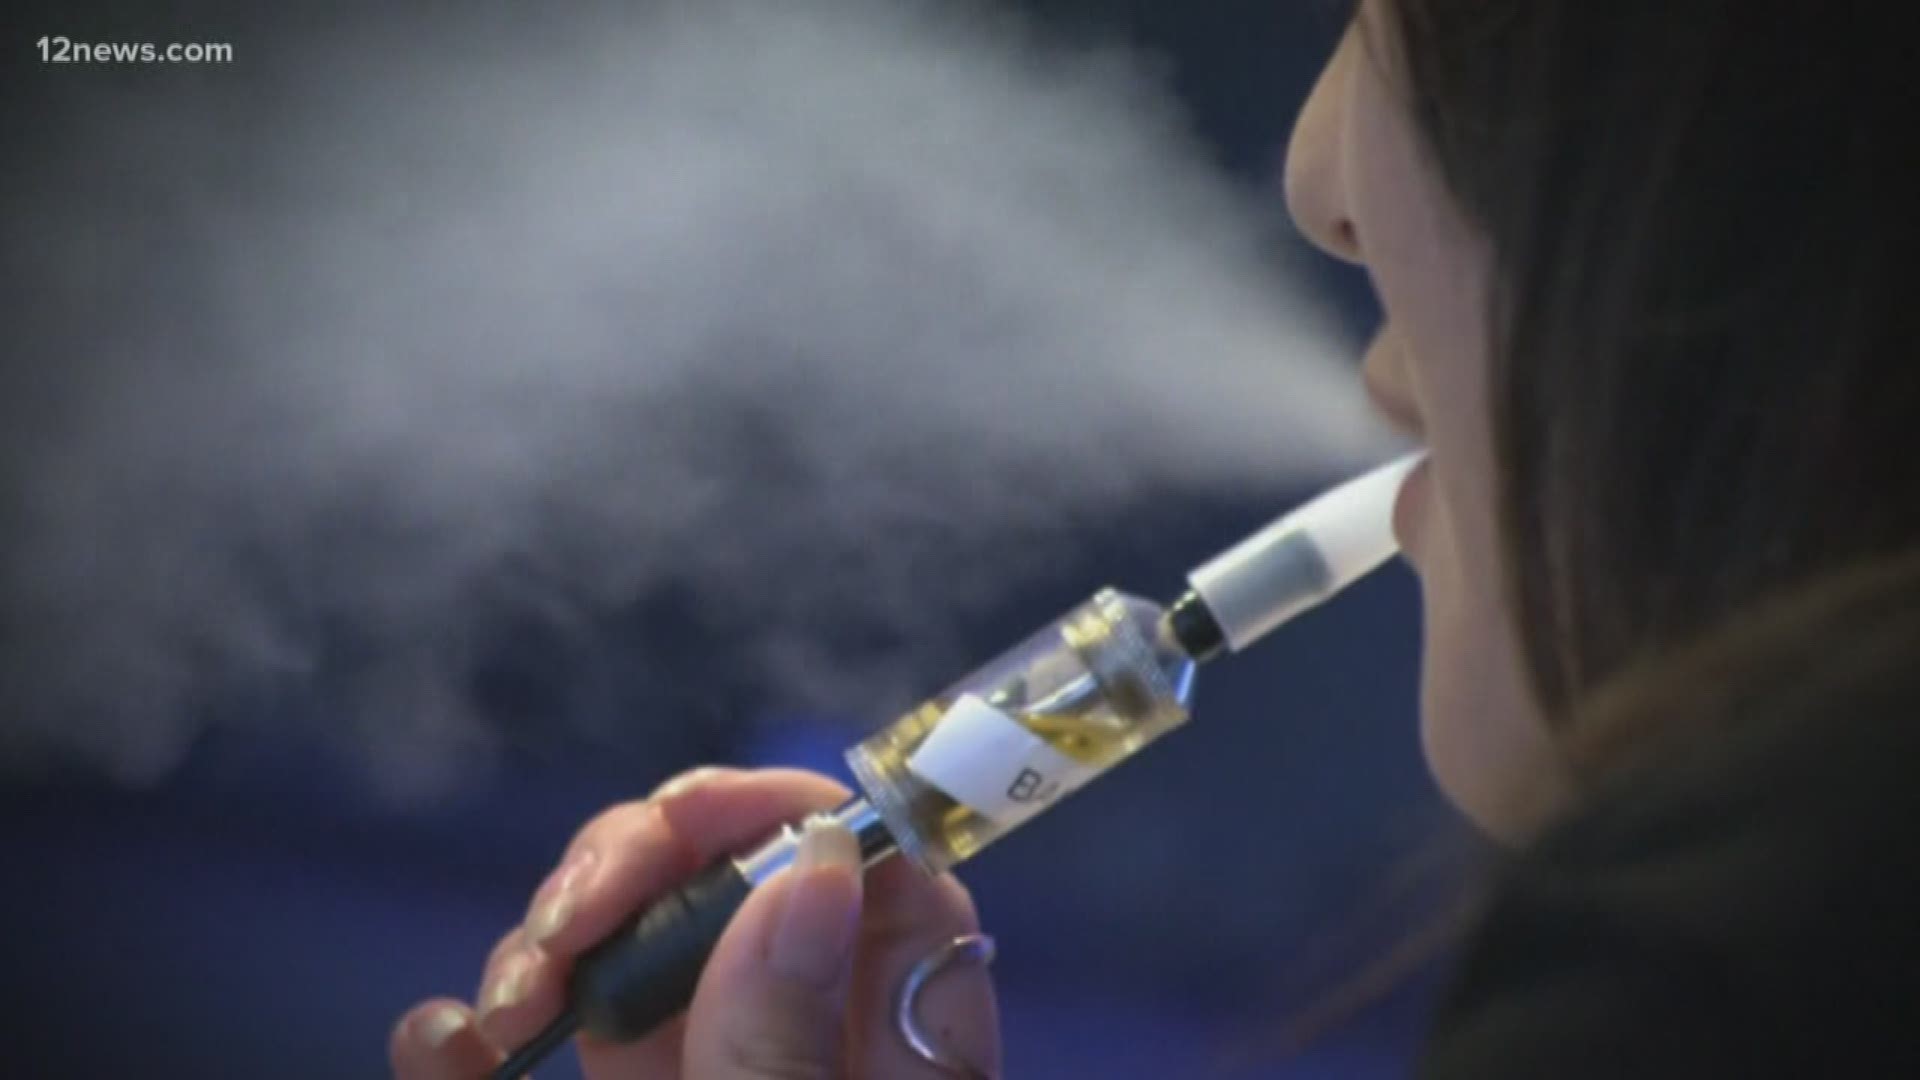 The Mayo Clinic study out of Arizona is the first in the nation to look at biopsies of patients with vaping-related lung injuries.